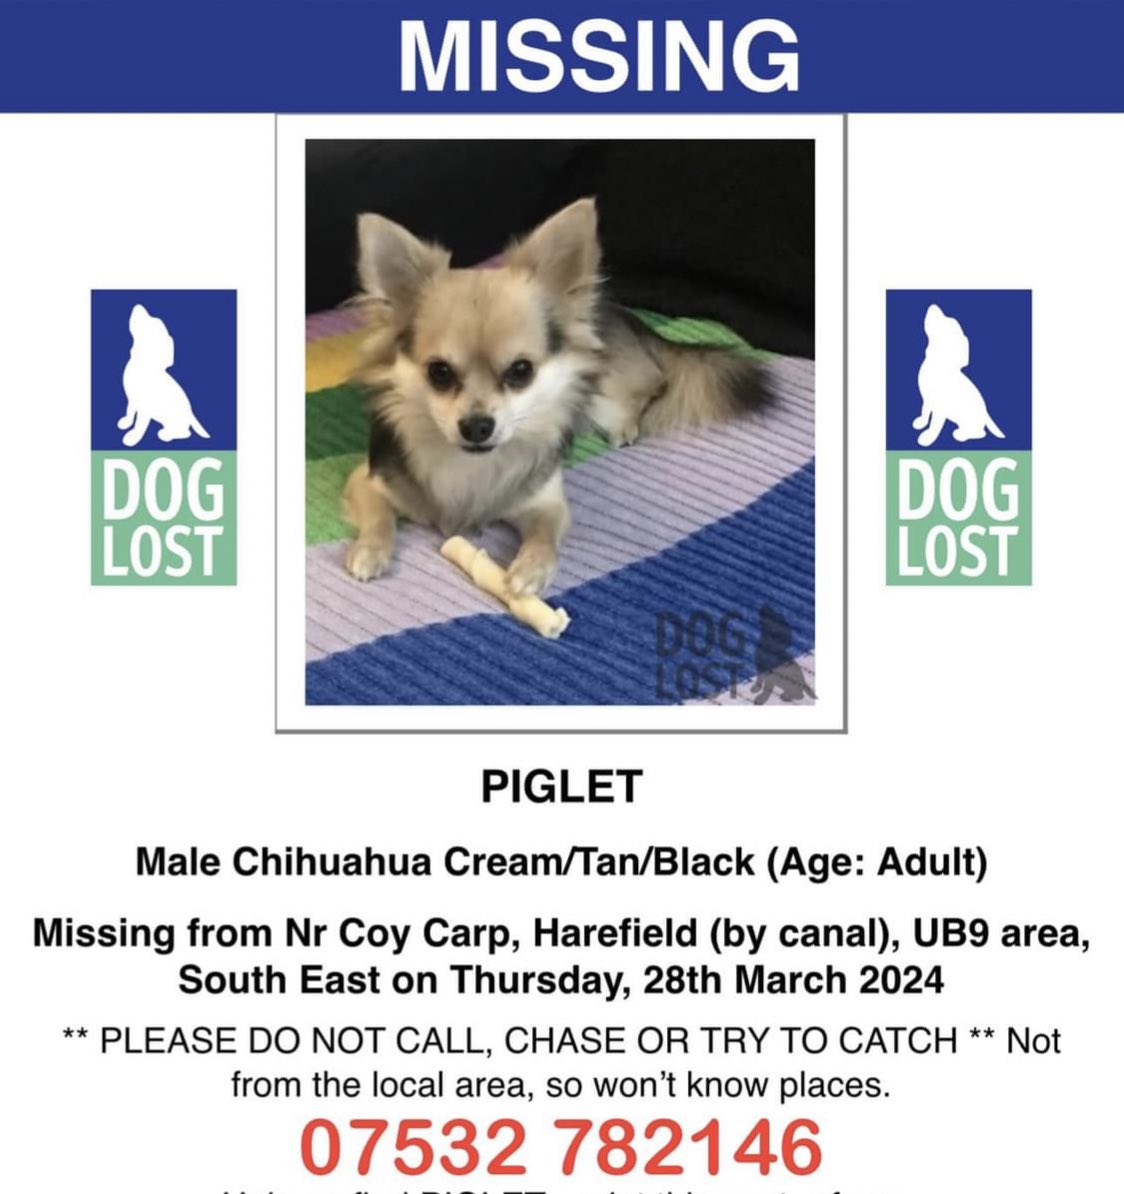 🆘 PLEASE #HELPUS FIND this little #Lost #Dog - If u are local 2 #Harefield, #Denham, #Rickmansworth, #MapleCross please print off a poster & put in yr car window, really need to spread the word #UB9 #Chihuahua if u know someone who’s found & kept him this is ❌THEFT BY FINDING❌